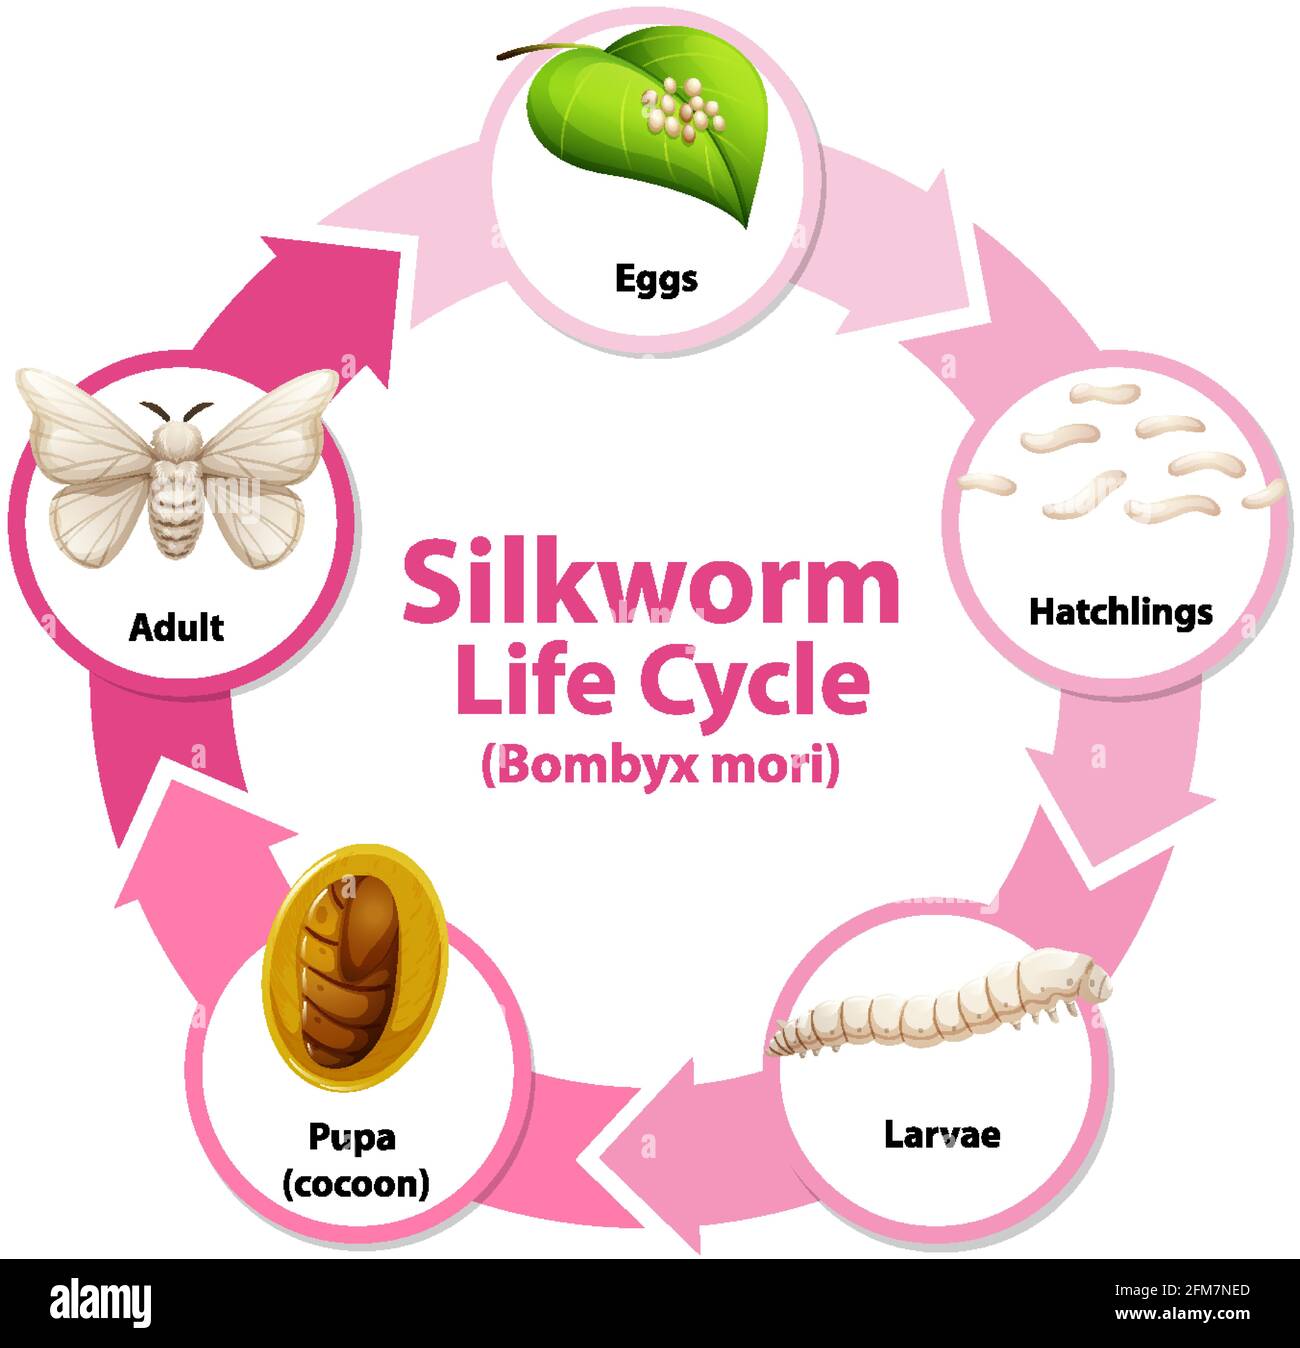 Diagram showing life cycle of Silkworm illustration Stock Vector